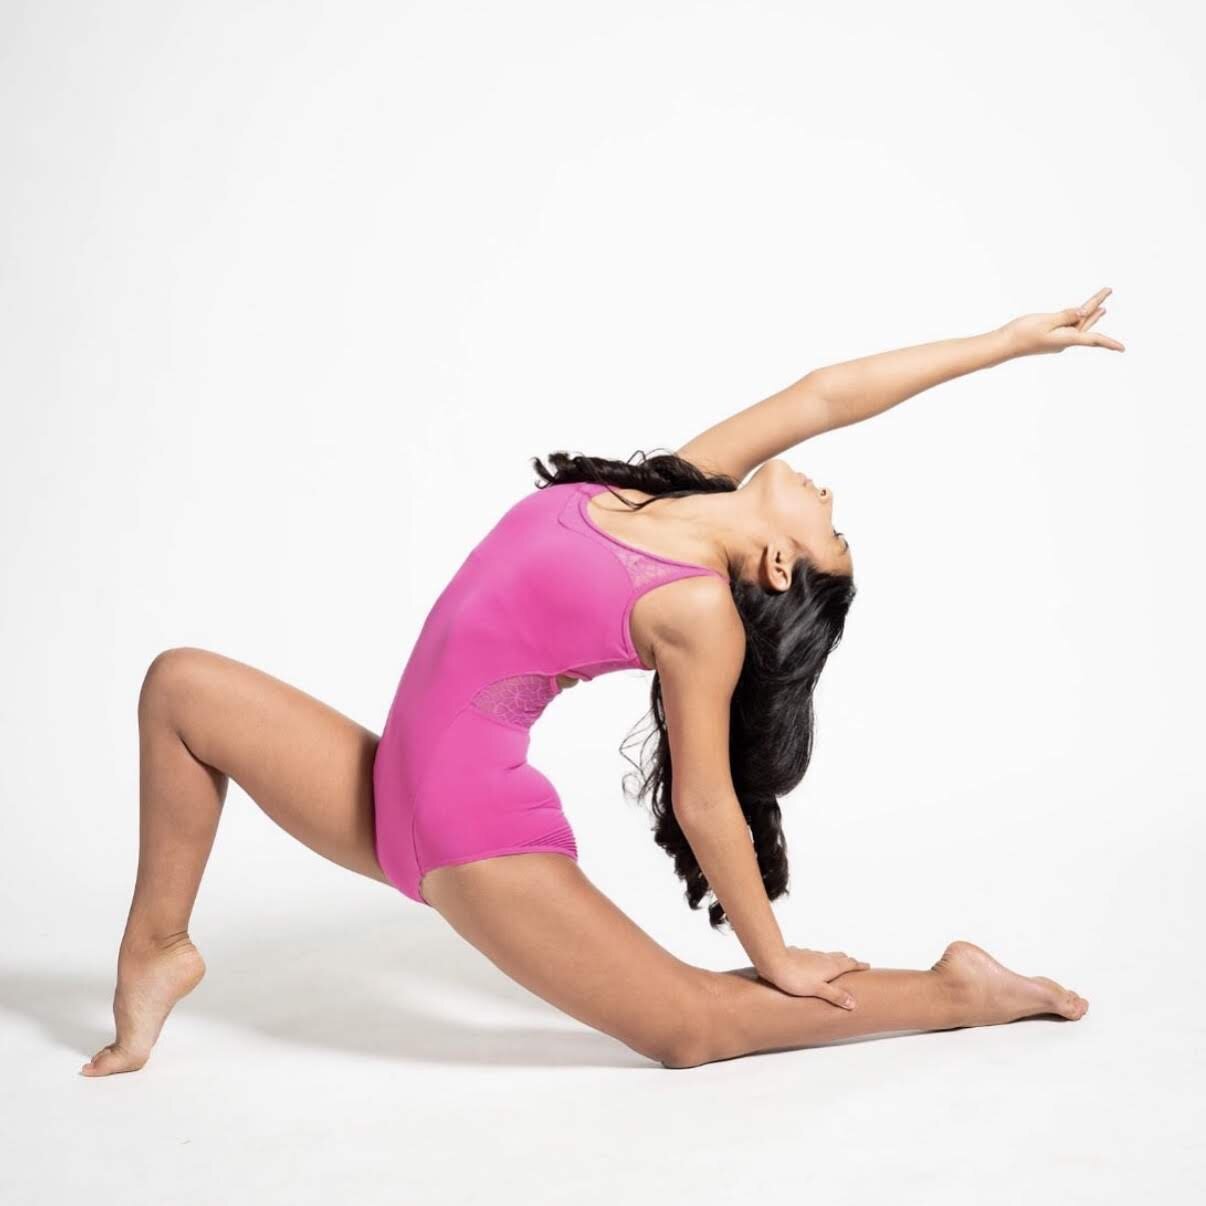 Dancer posing in a stretched pose. (Copy) (Copy) (Copy) (Copy) (Copy) (Copy) (Copy) (Copy) (Copy)